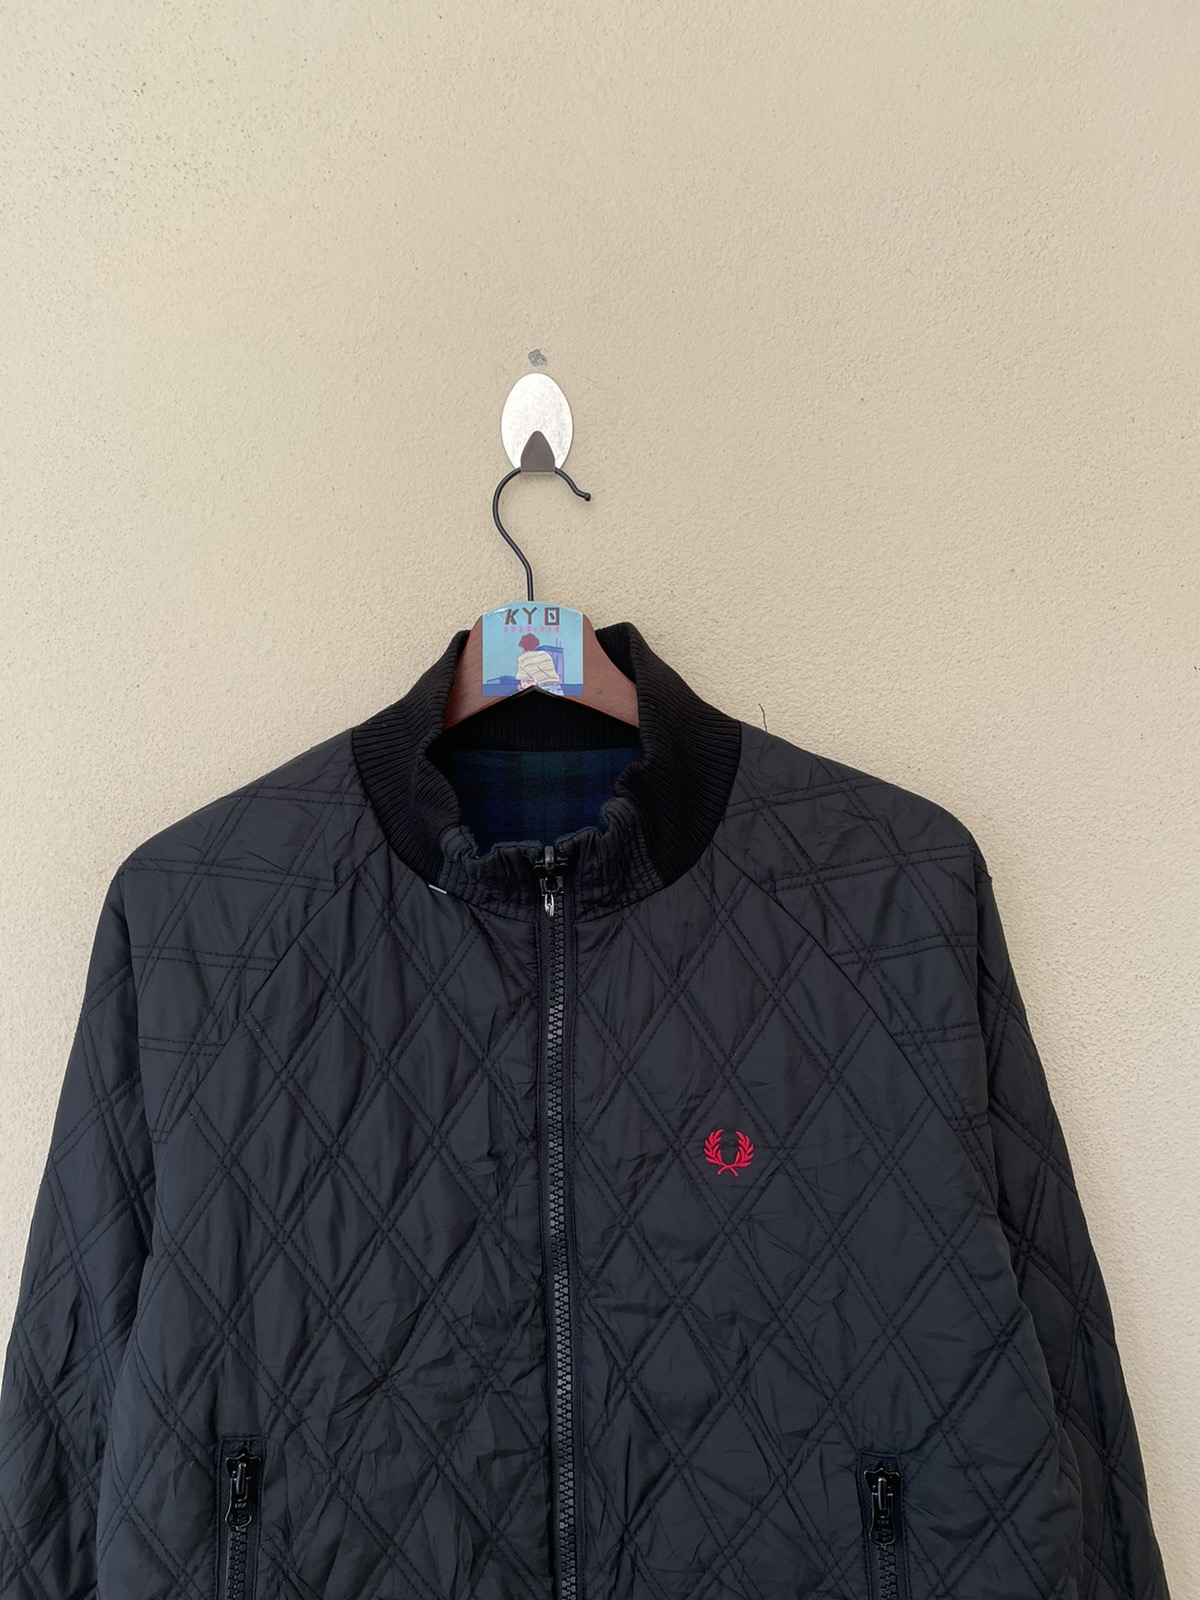 FRED PERRY REVERSIBLE JACKET - 9